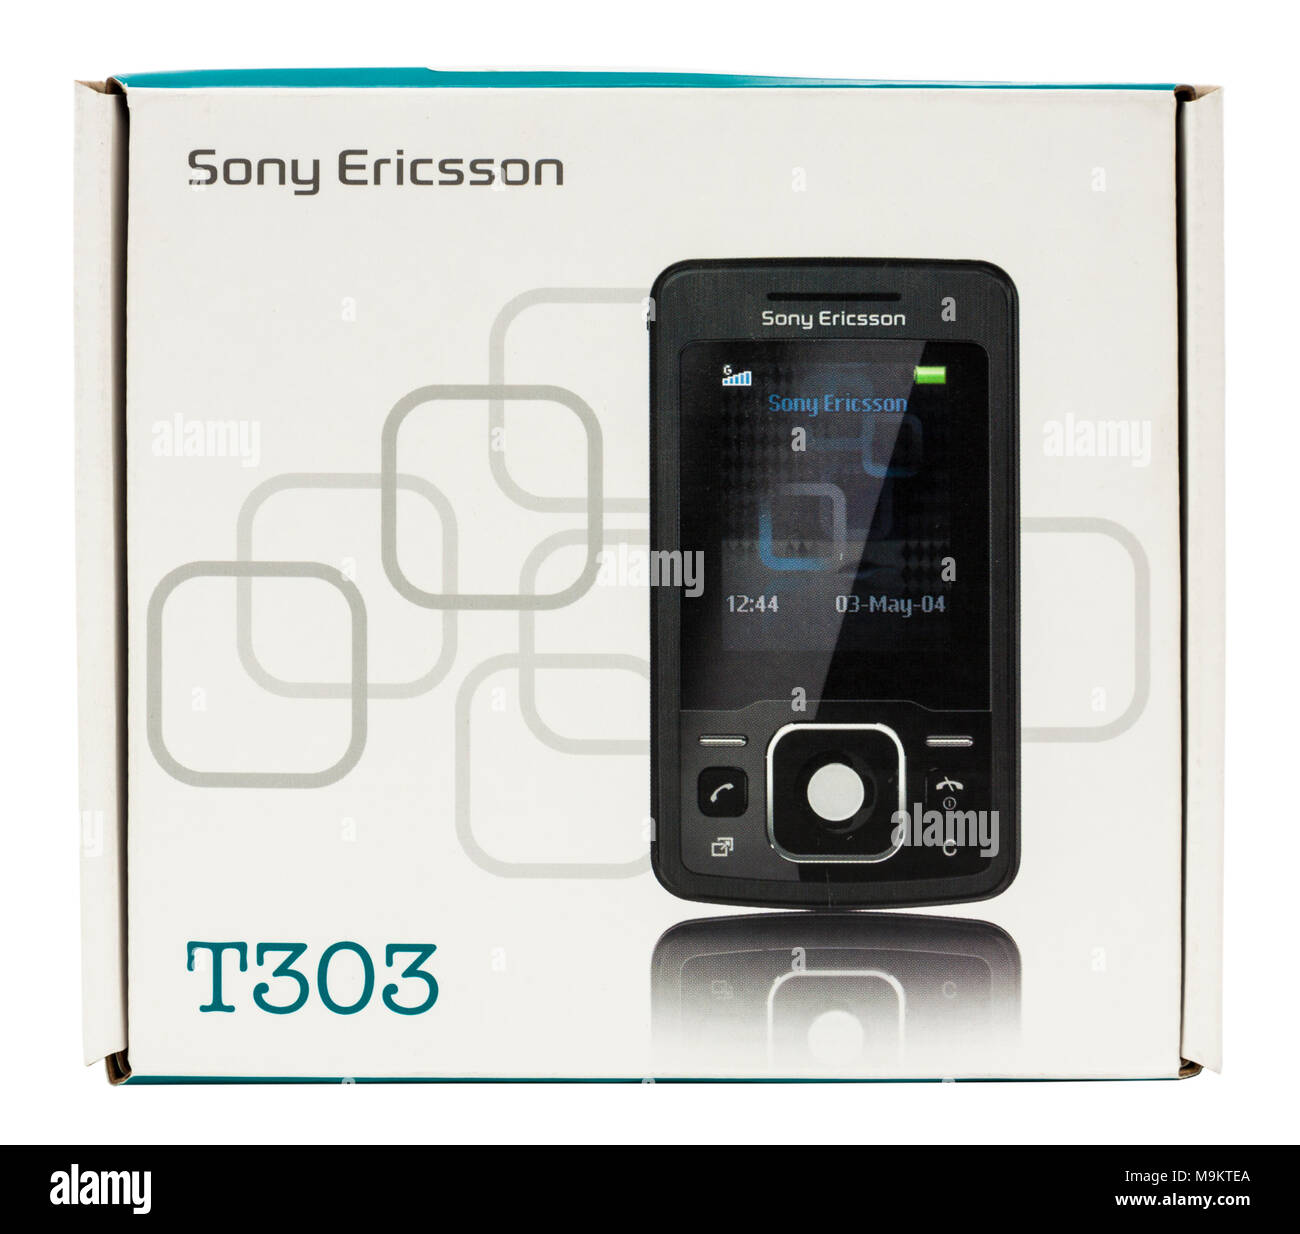 Sony Ericsson T303 mobile phone from 2008, weighing 90g and featuring a WAP browser to (very slowly) access the Internet before 3G/4G existed. Stock Photo